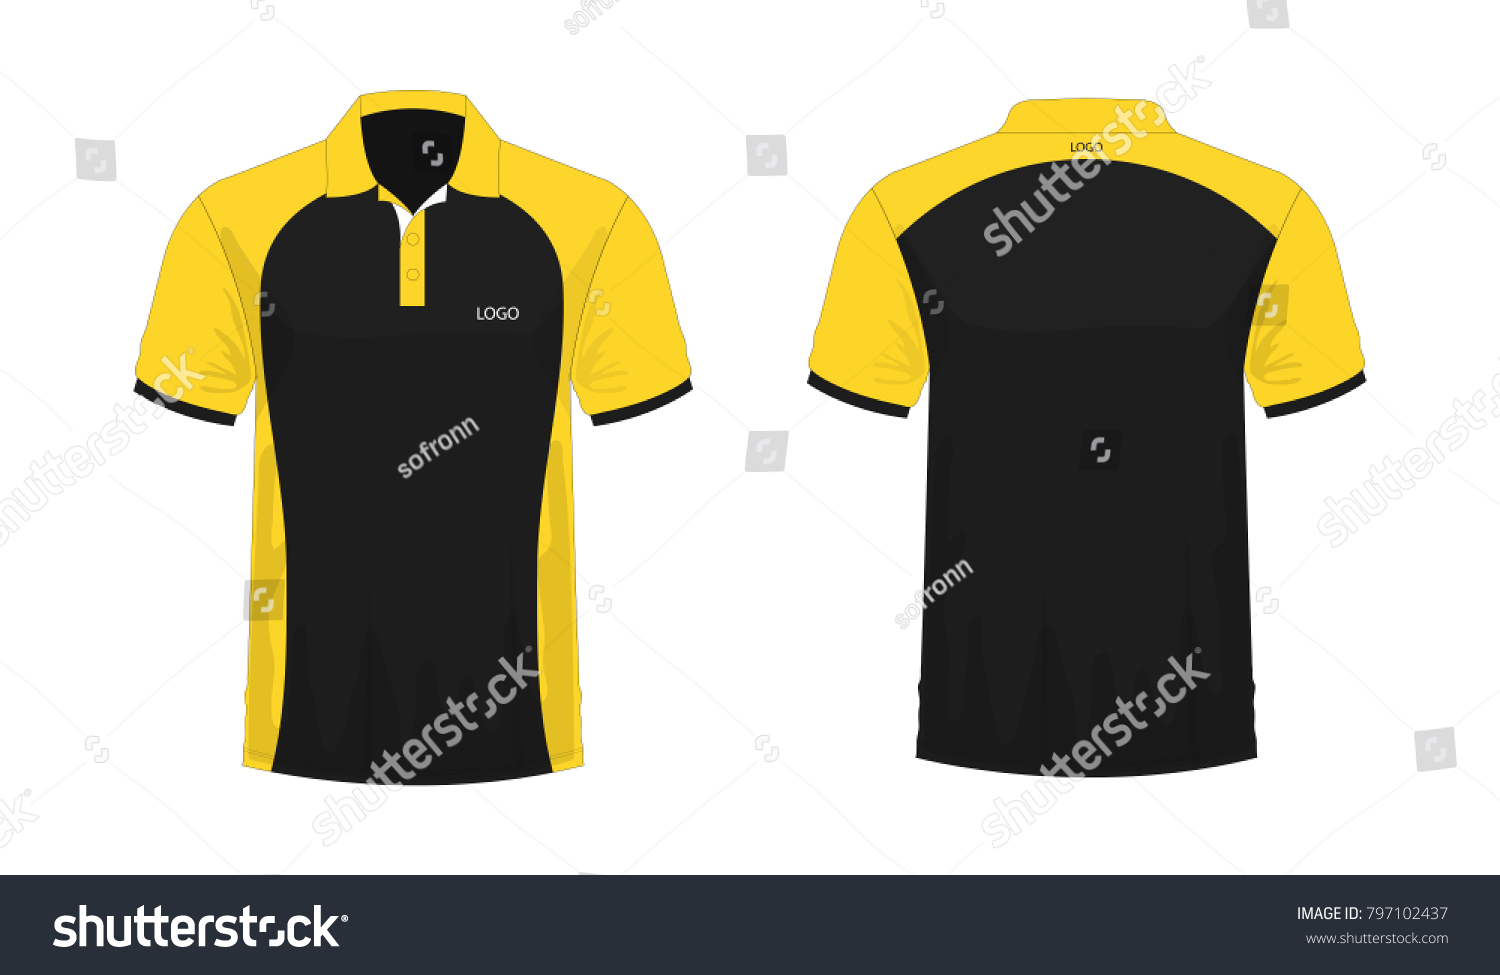 12,398 Polo tshirt template Images, Stock Photos & Vectors | Shutterstock